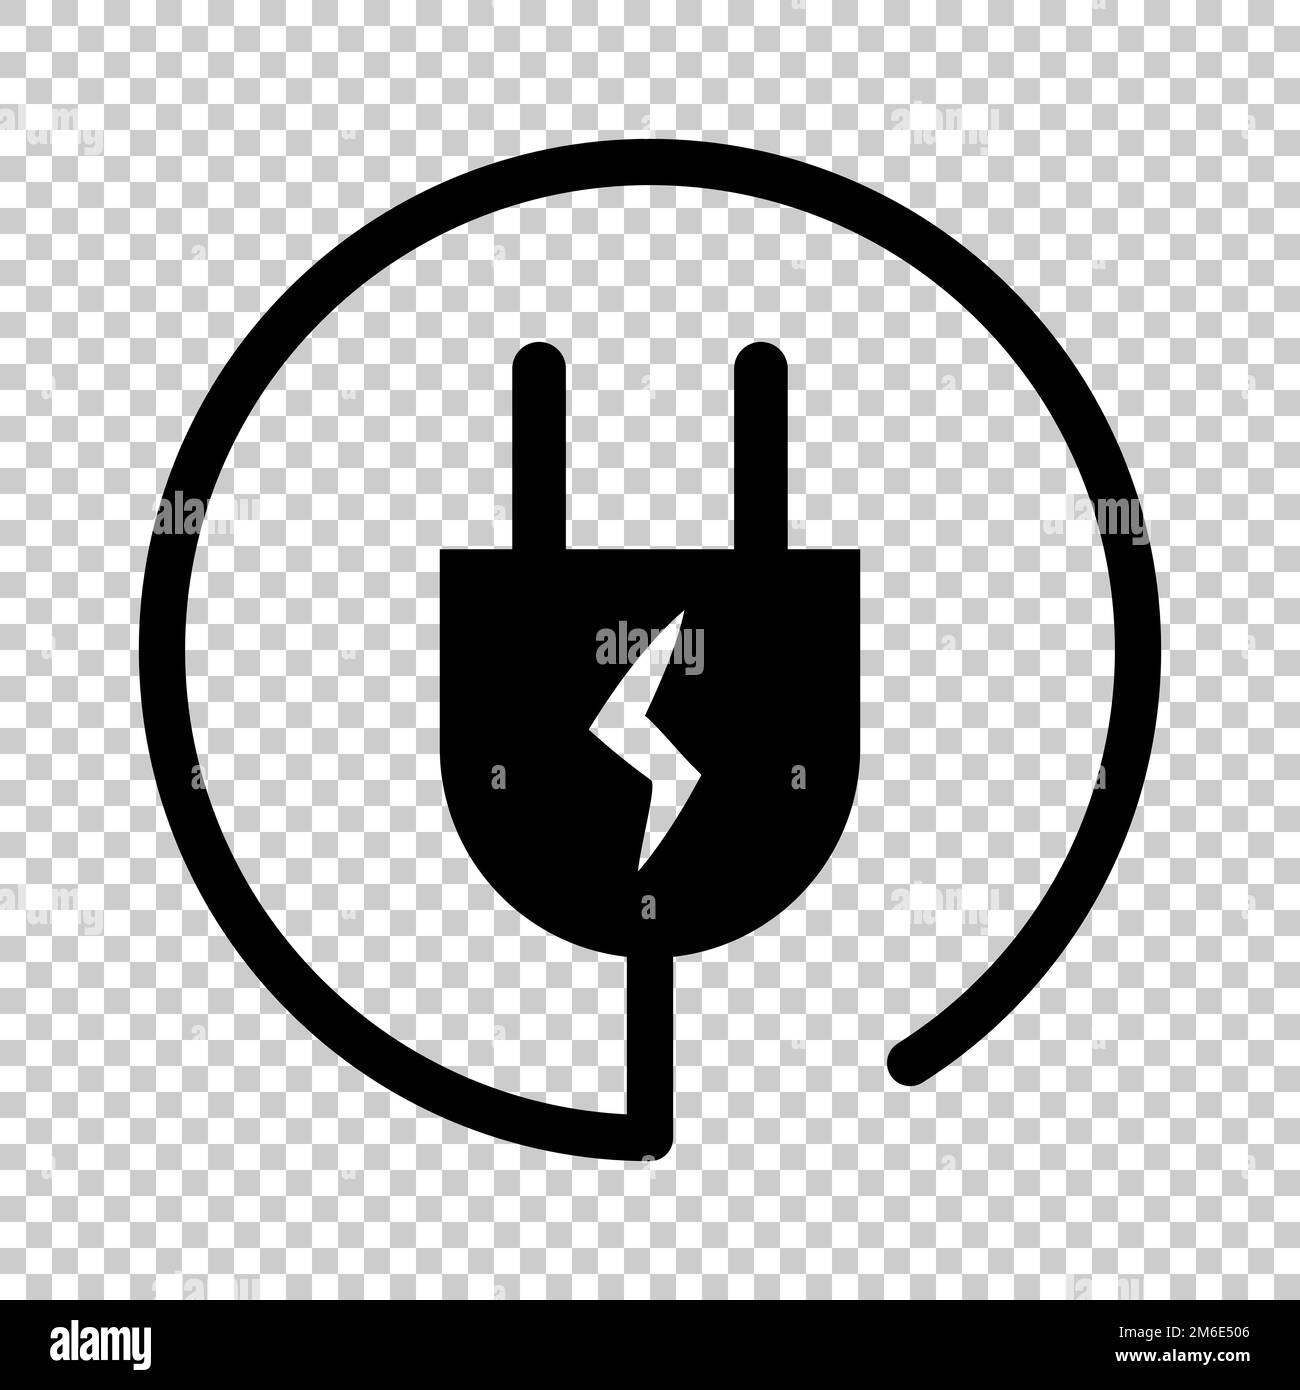 Charging plug silhouette icon isolated on transparent background. Power outlet. Editable vector. Stock Vector